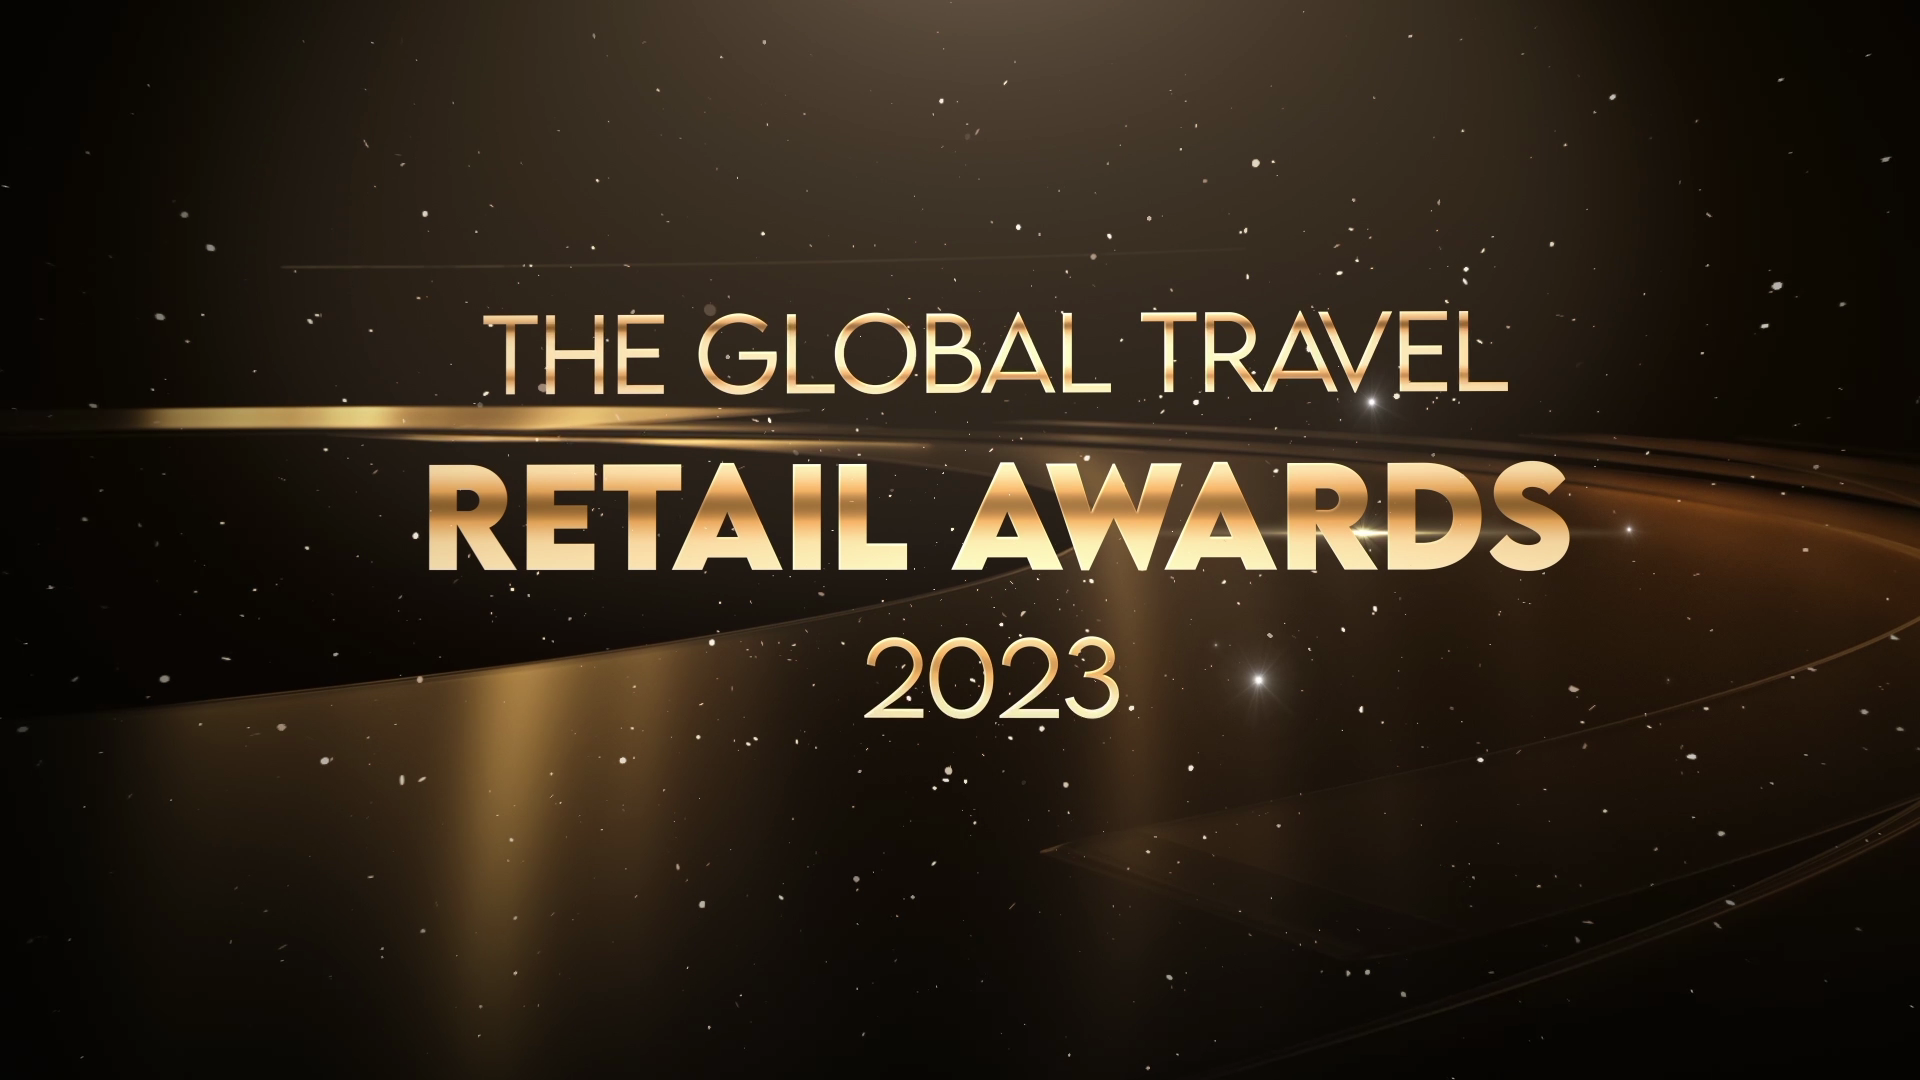 The Global Travel Retail Awards 2023